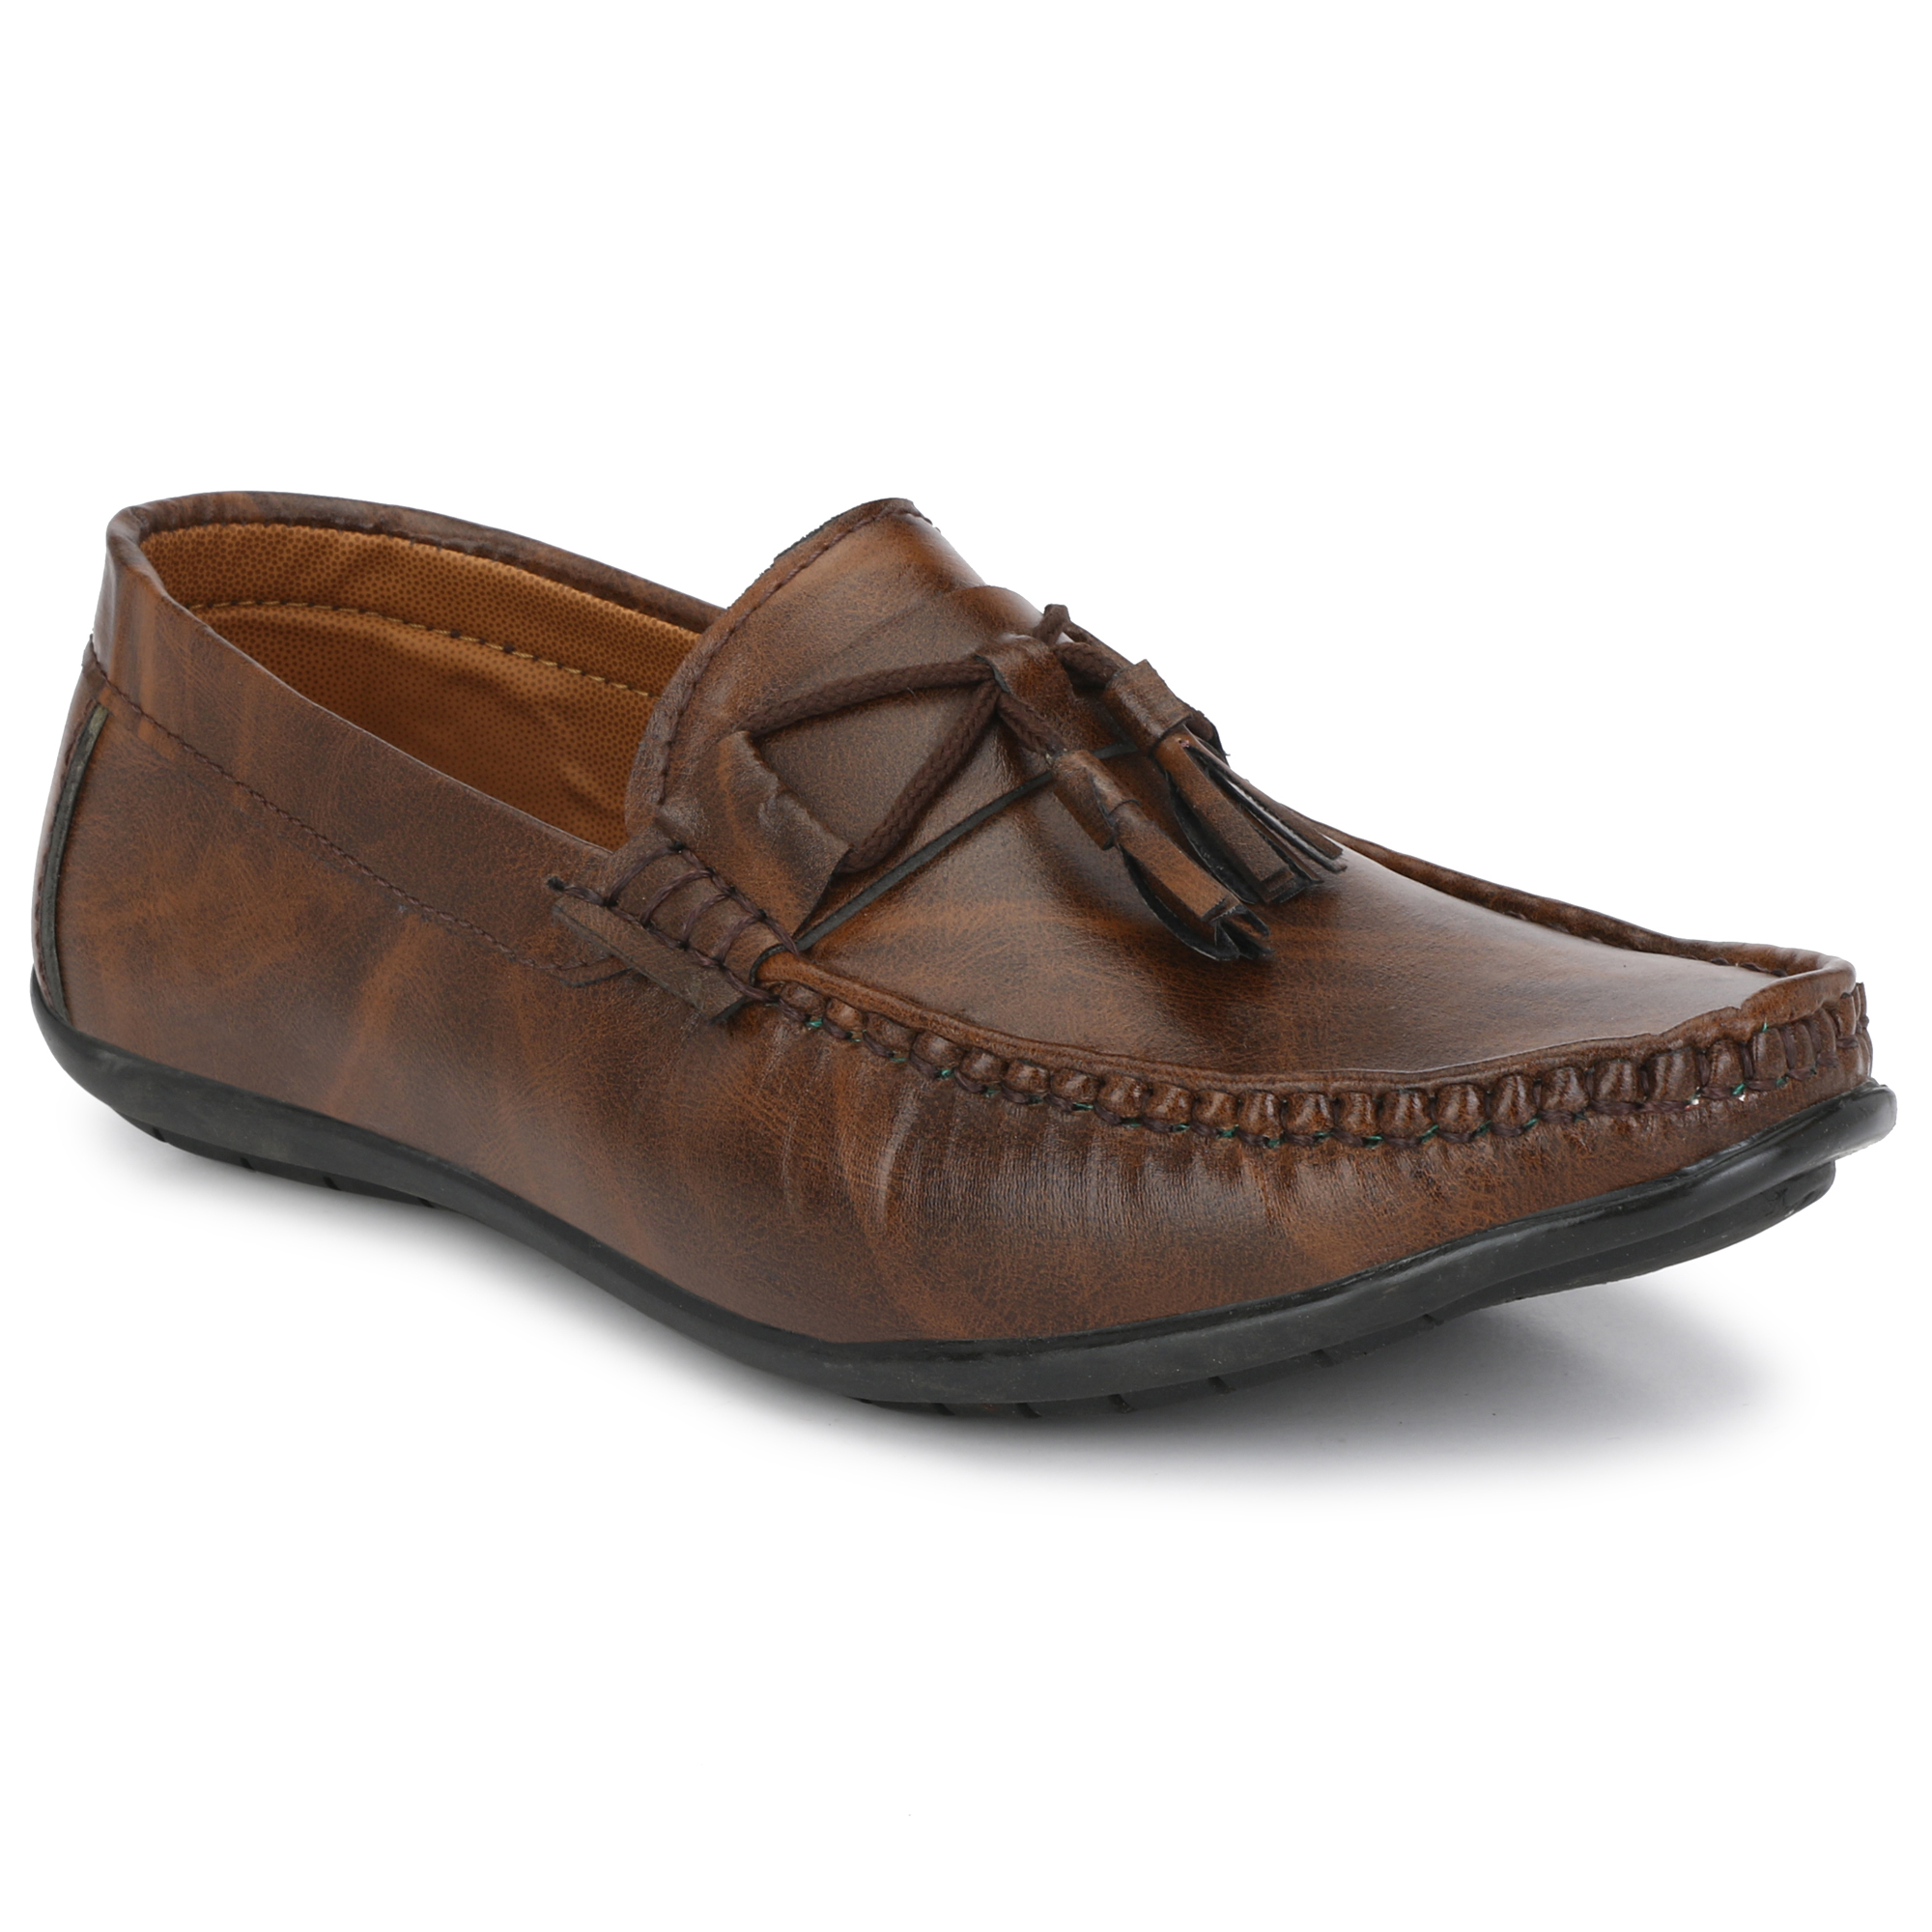 Buy Bucik Men's Brown Synthetic Leather Loafers Online - Get 76% Off